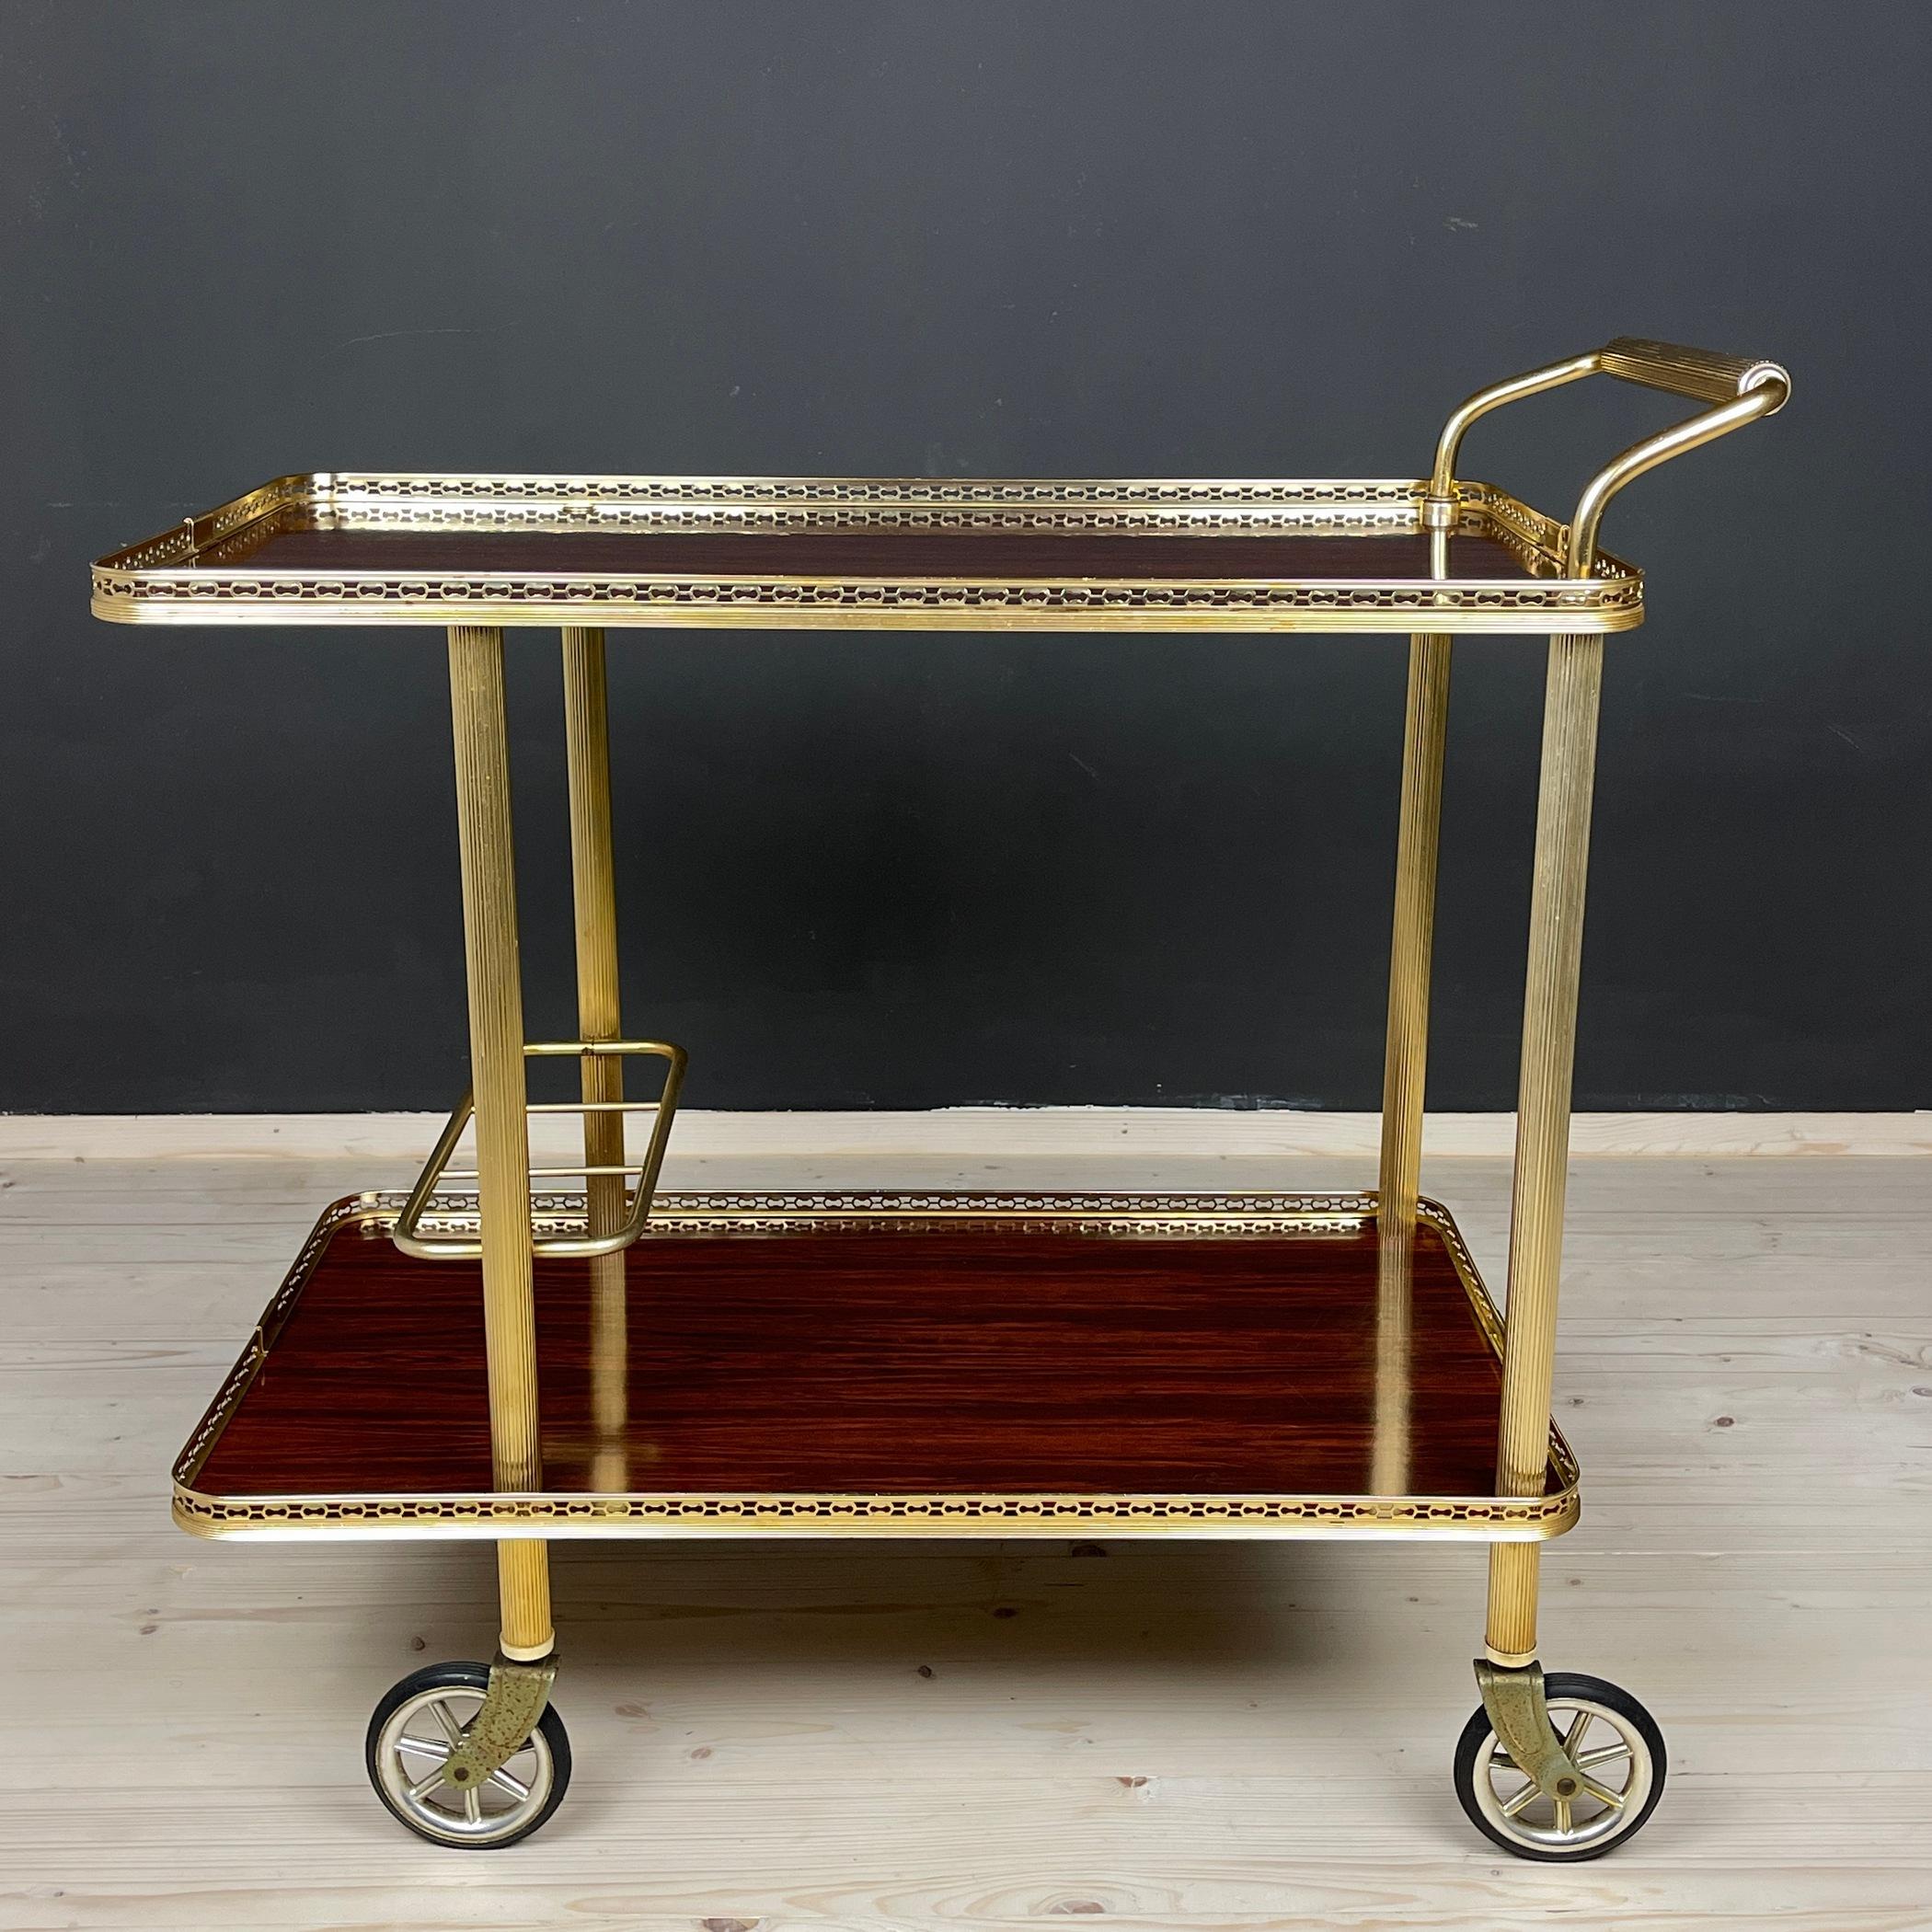 Vintage Italian trolley on 4 wheels. This cocktail bar drinks cart was made in Italy in a 1970s Hollywood Regency style. It has surrounded by a filigree brass railing around an oval tray. Perfect for drinks, tea, coffee. Very good vintage condition